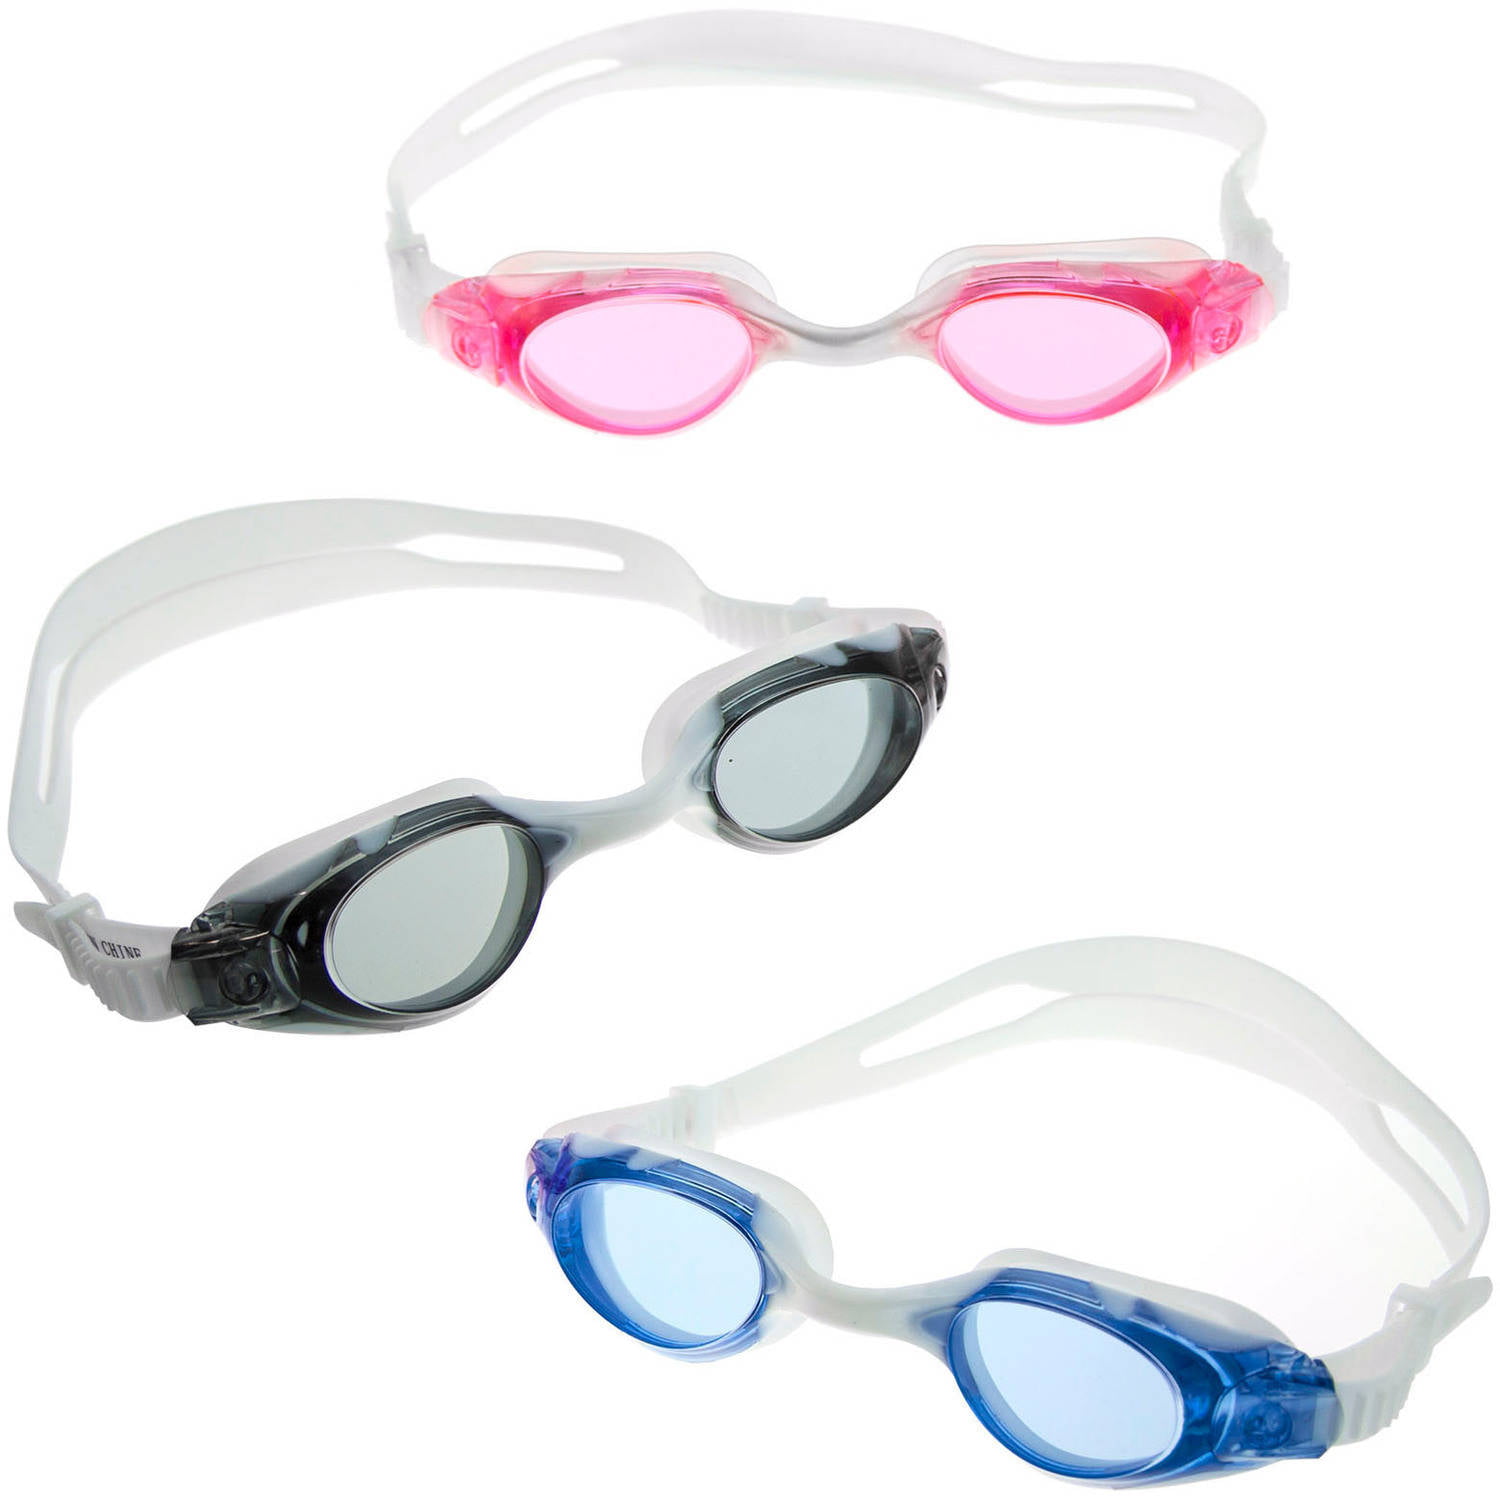 NEW Adult Swim Goggles 2 Pair Blue and Green Ages 14+ 